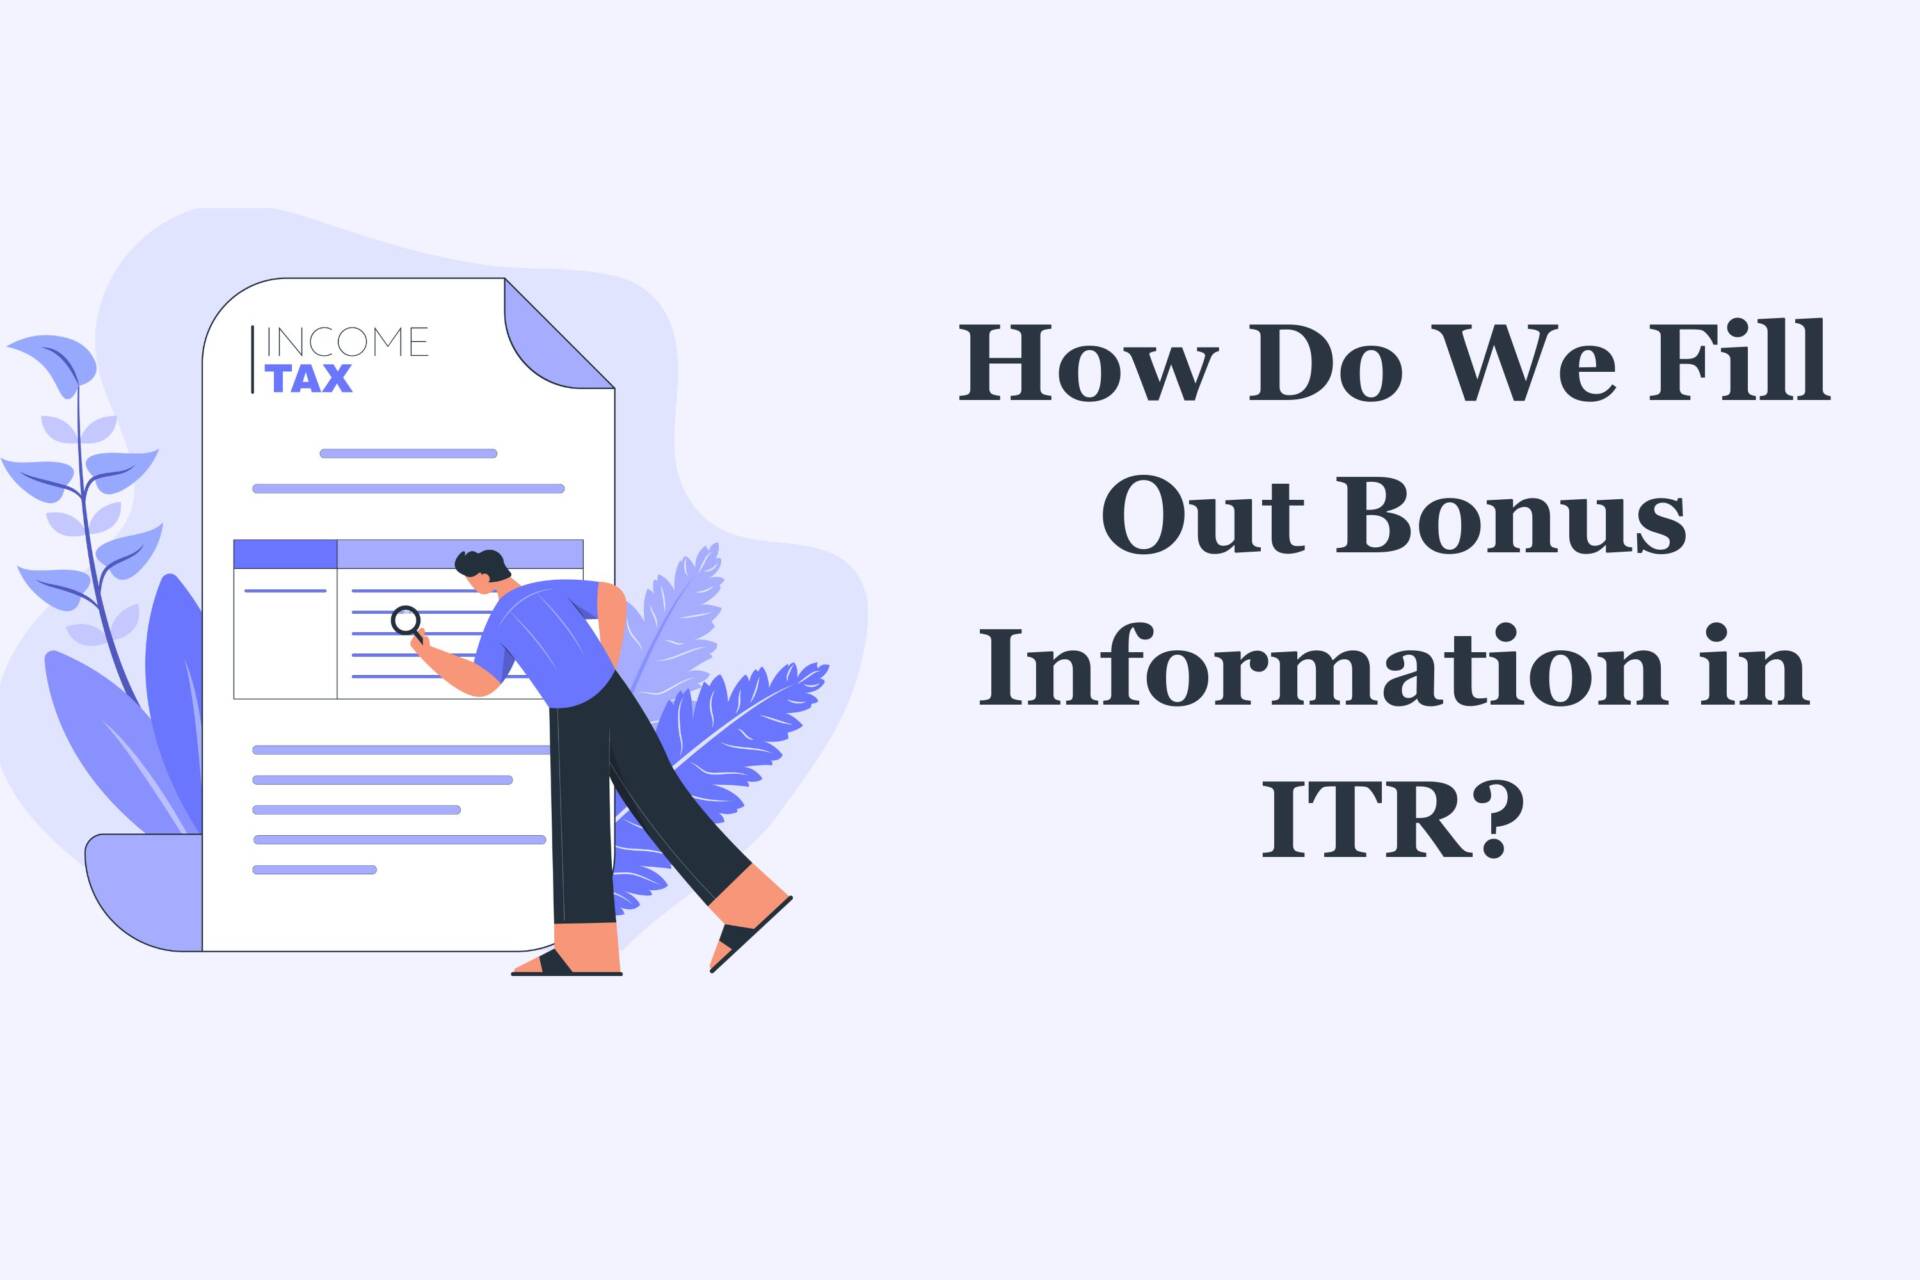 How Do We Fill Out Bonus Information in ITR?